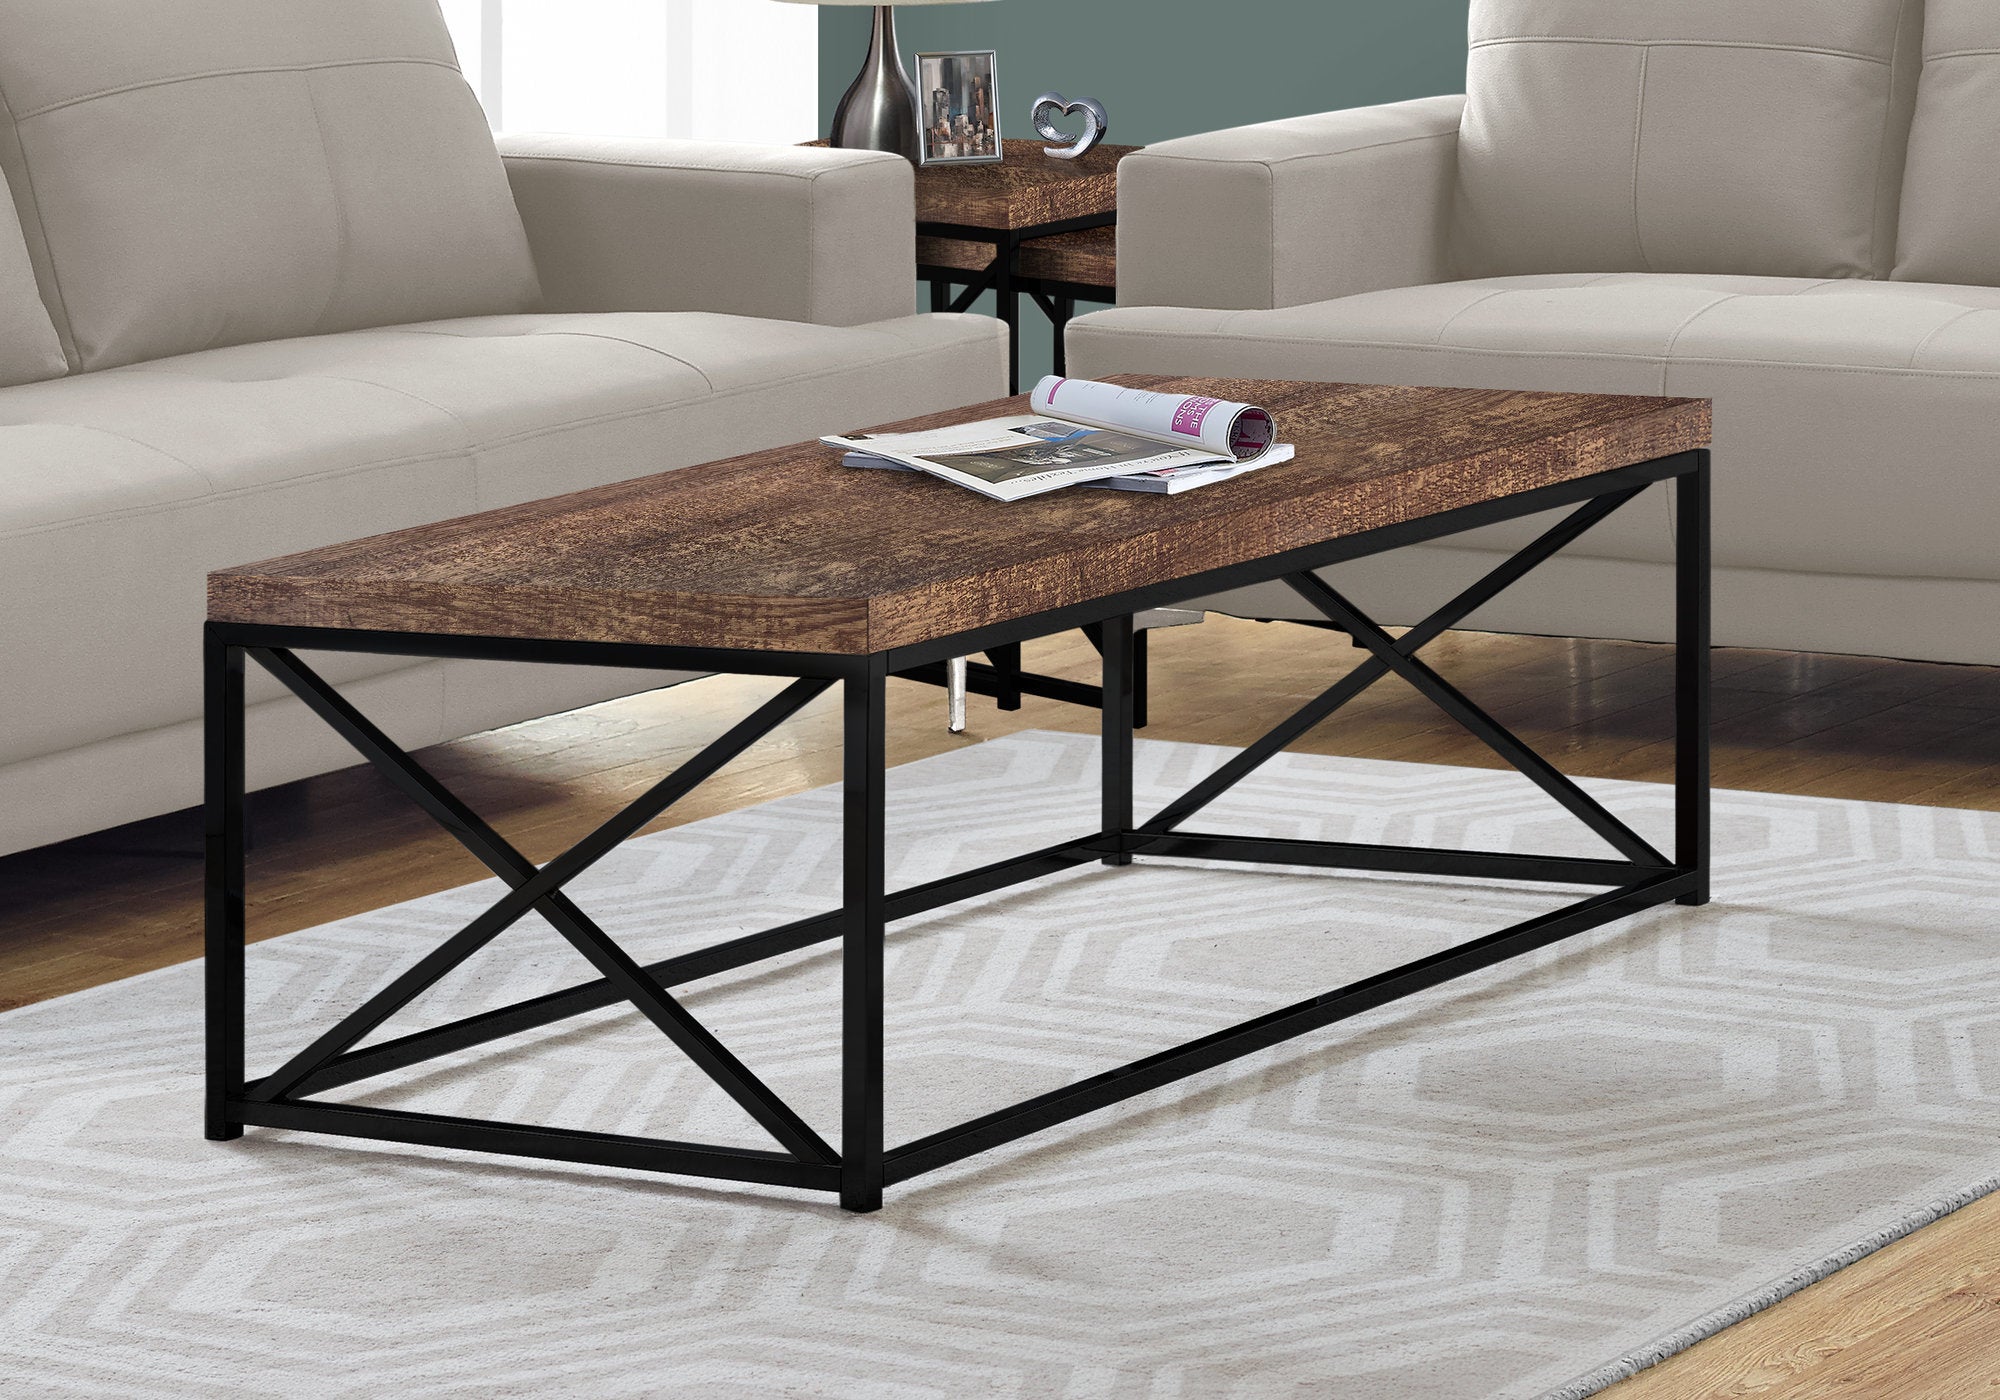 44" Brown And Black Iron Coffee Table